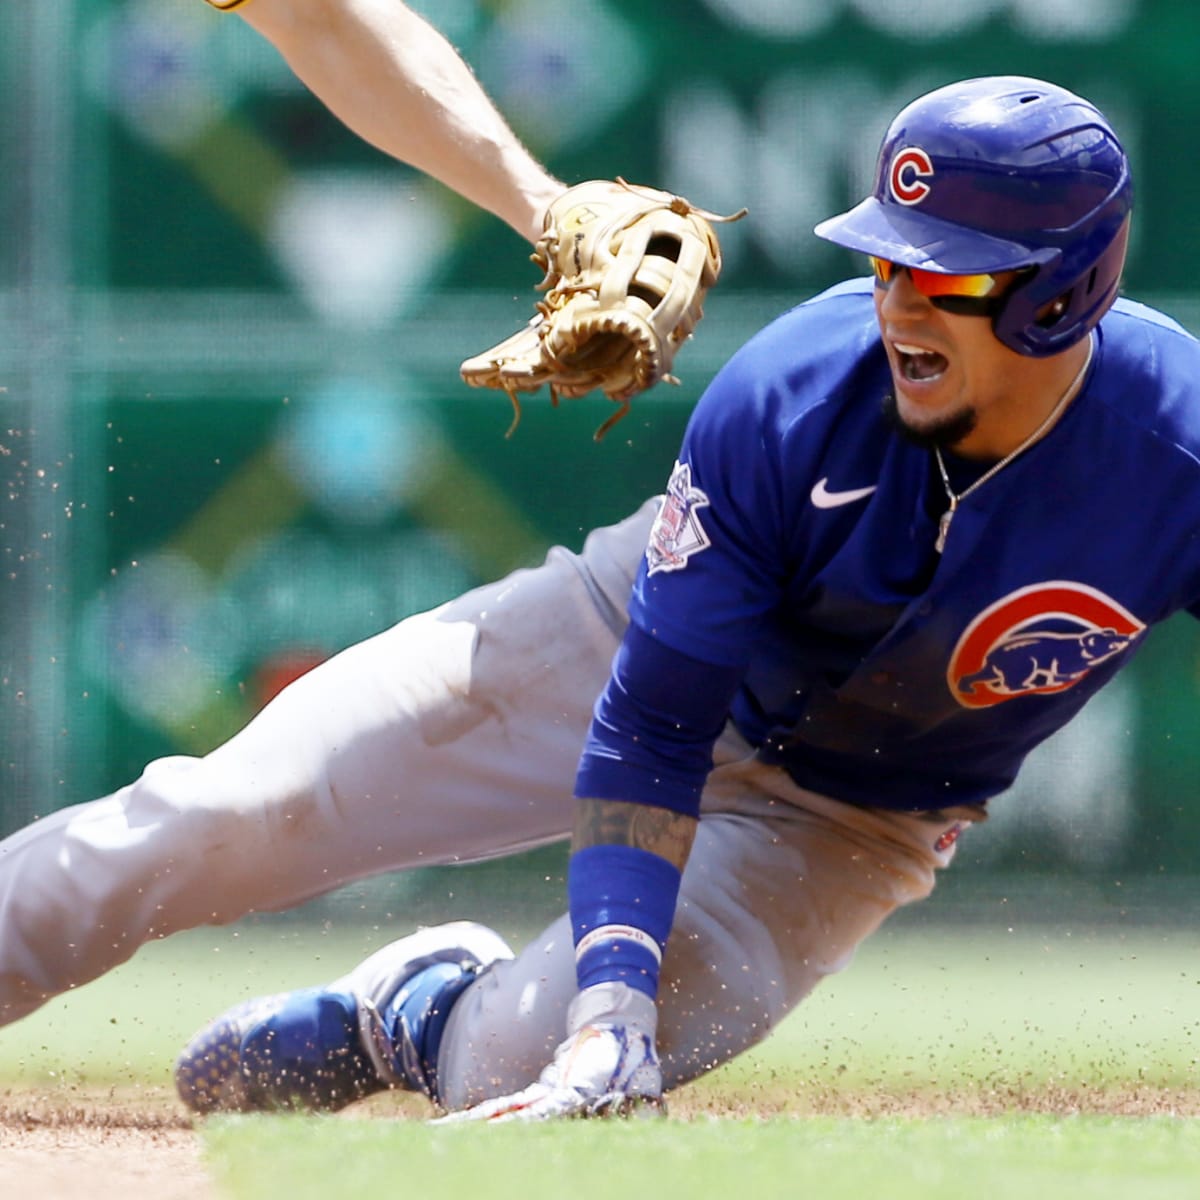 Messing around in the World Series (Javier Baez and Francisco